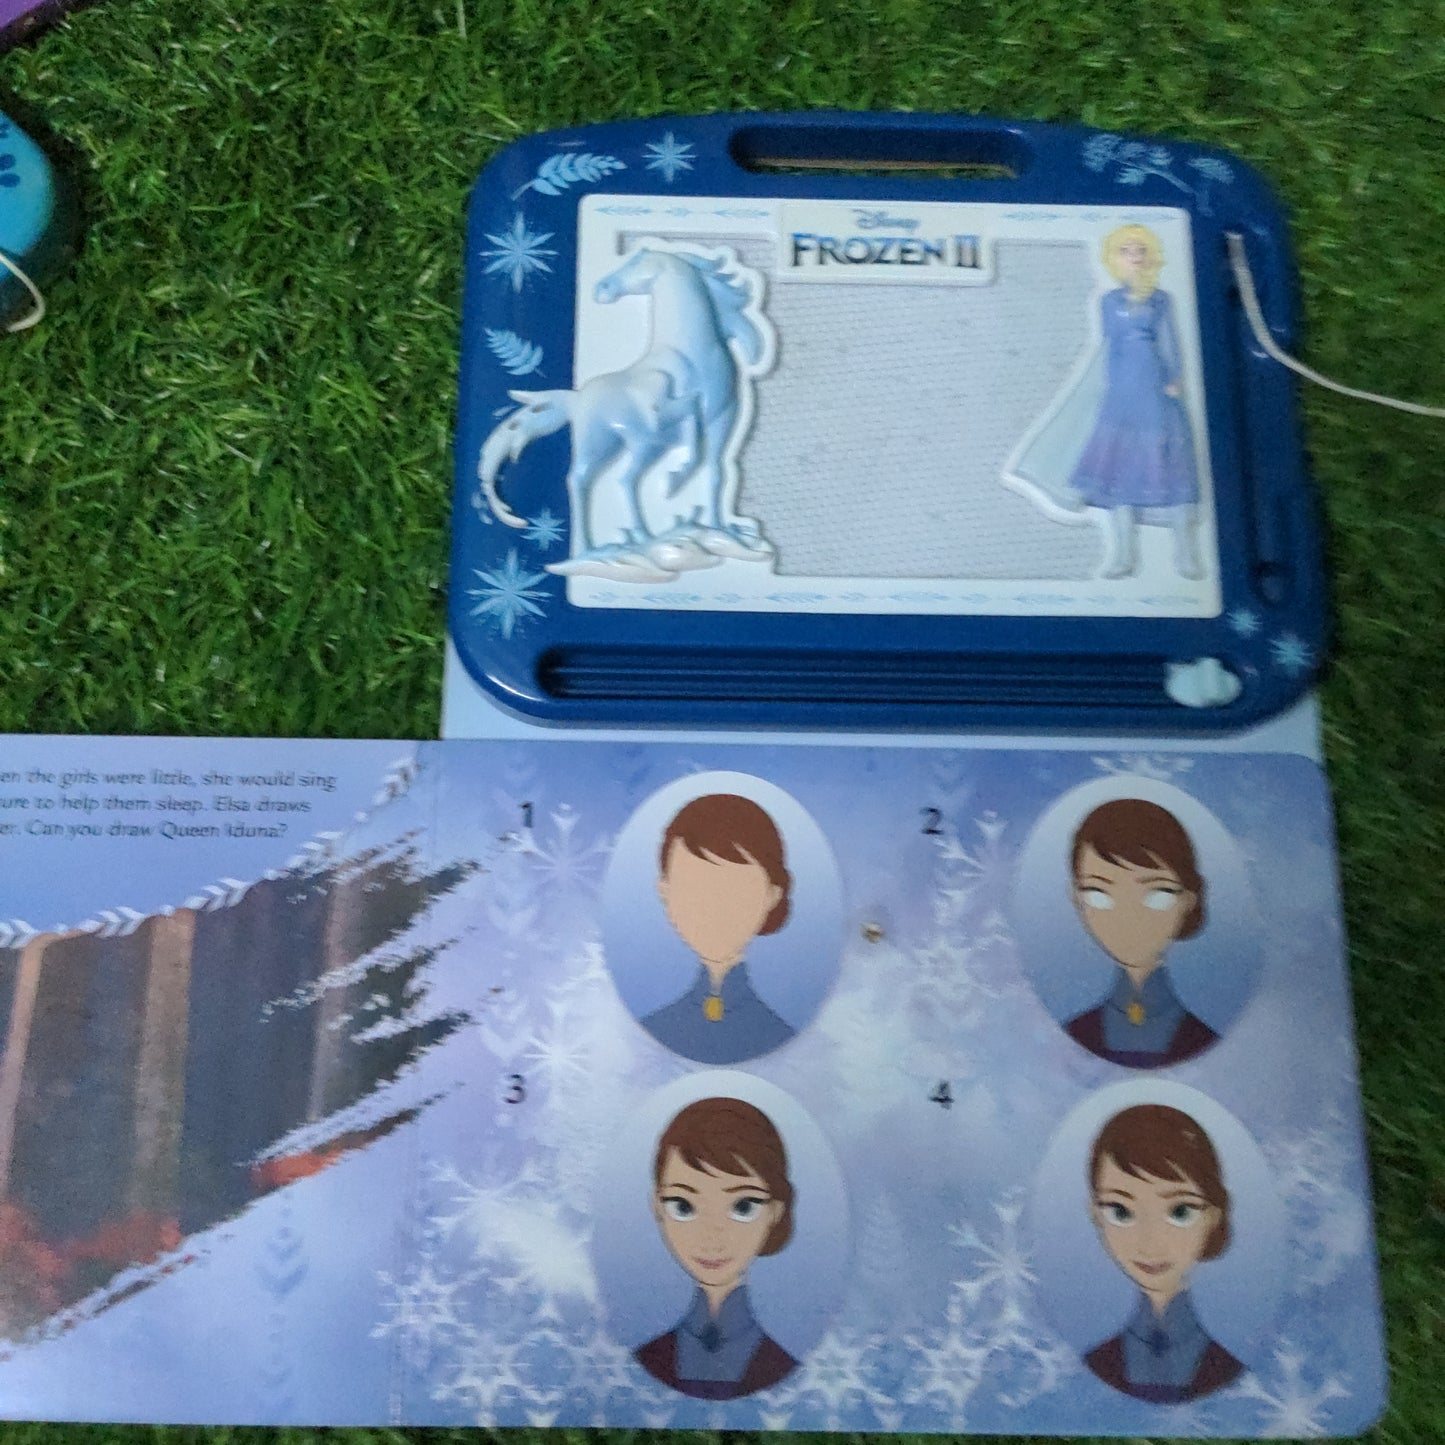 Magic Slate with Book - Frozen ll